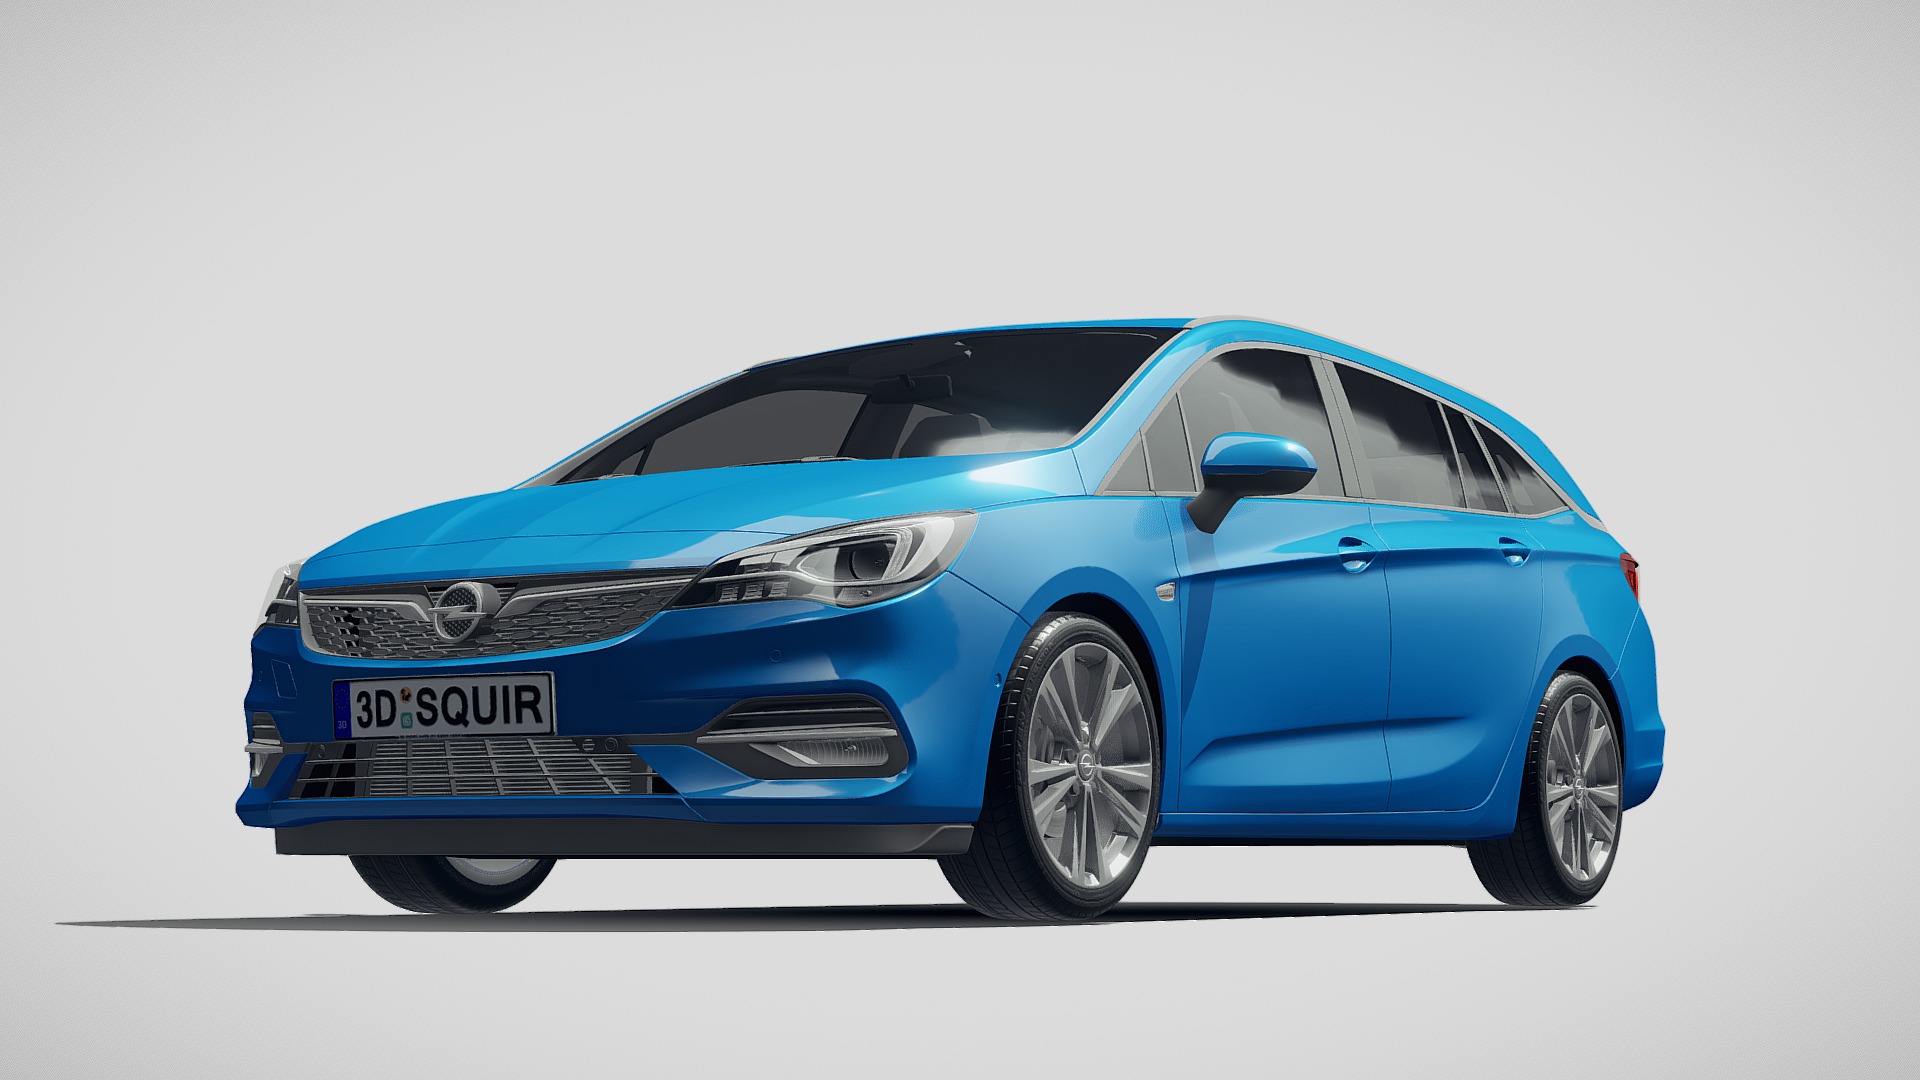 3D model Opel Astra Sports Tourer 2020 - This is a 3D model of the Opel Astra Sports Tourer 2020. The 3D model is about a blue car with a white background.